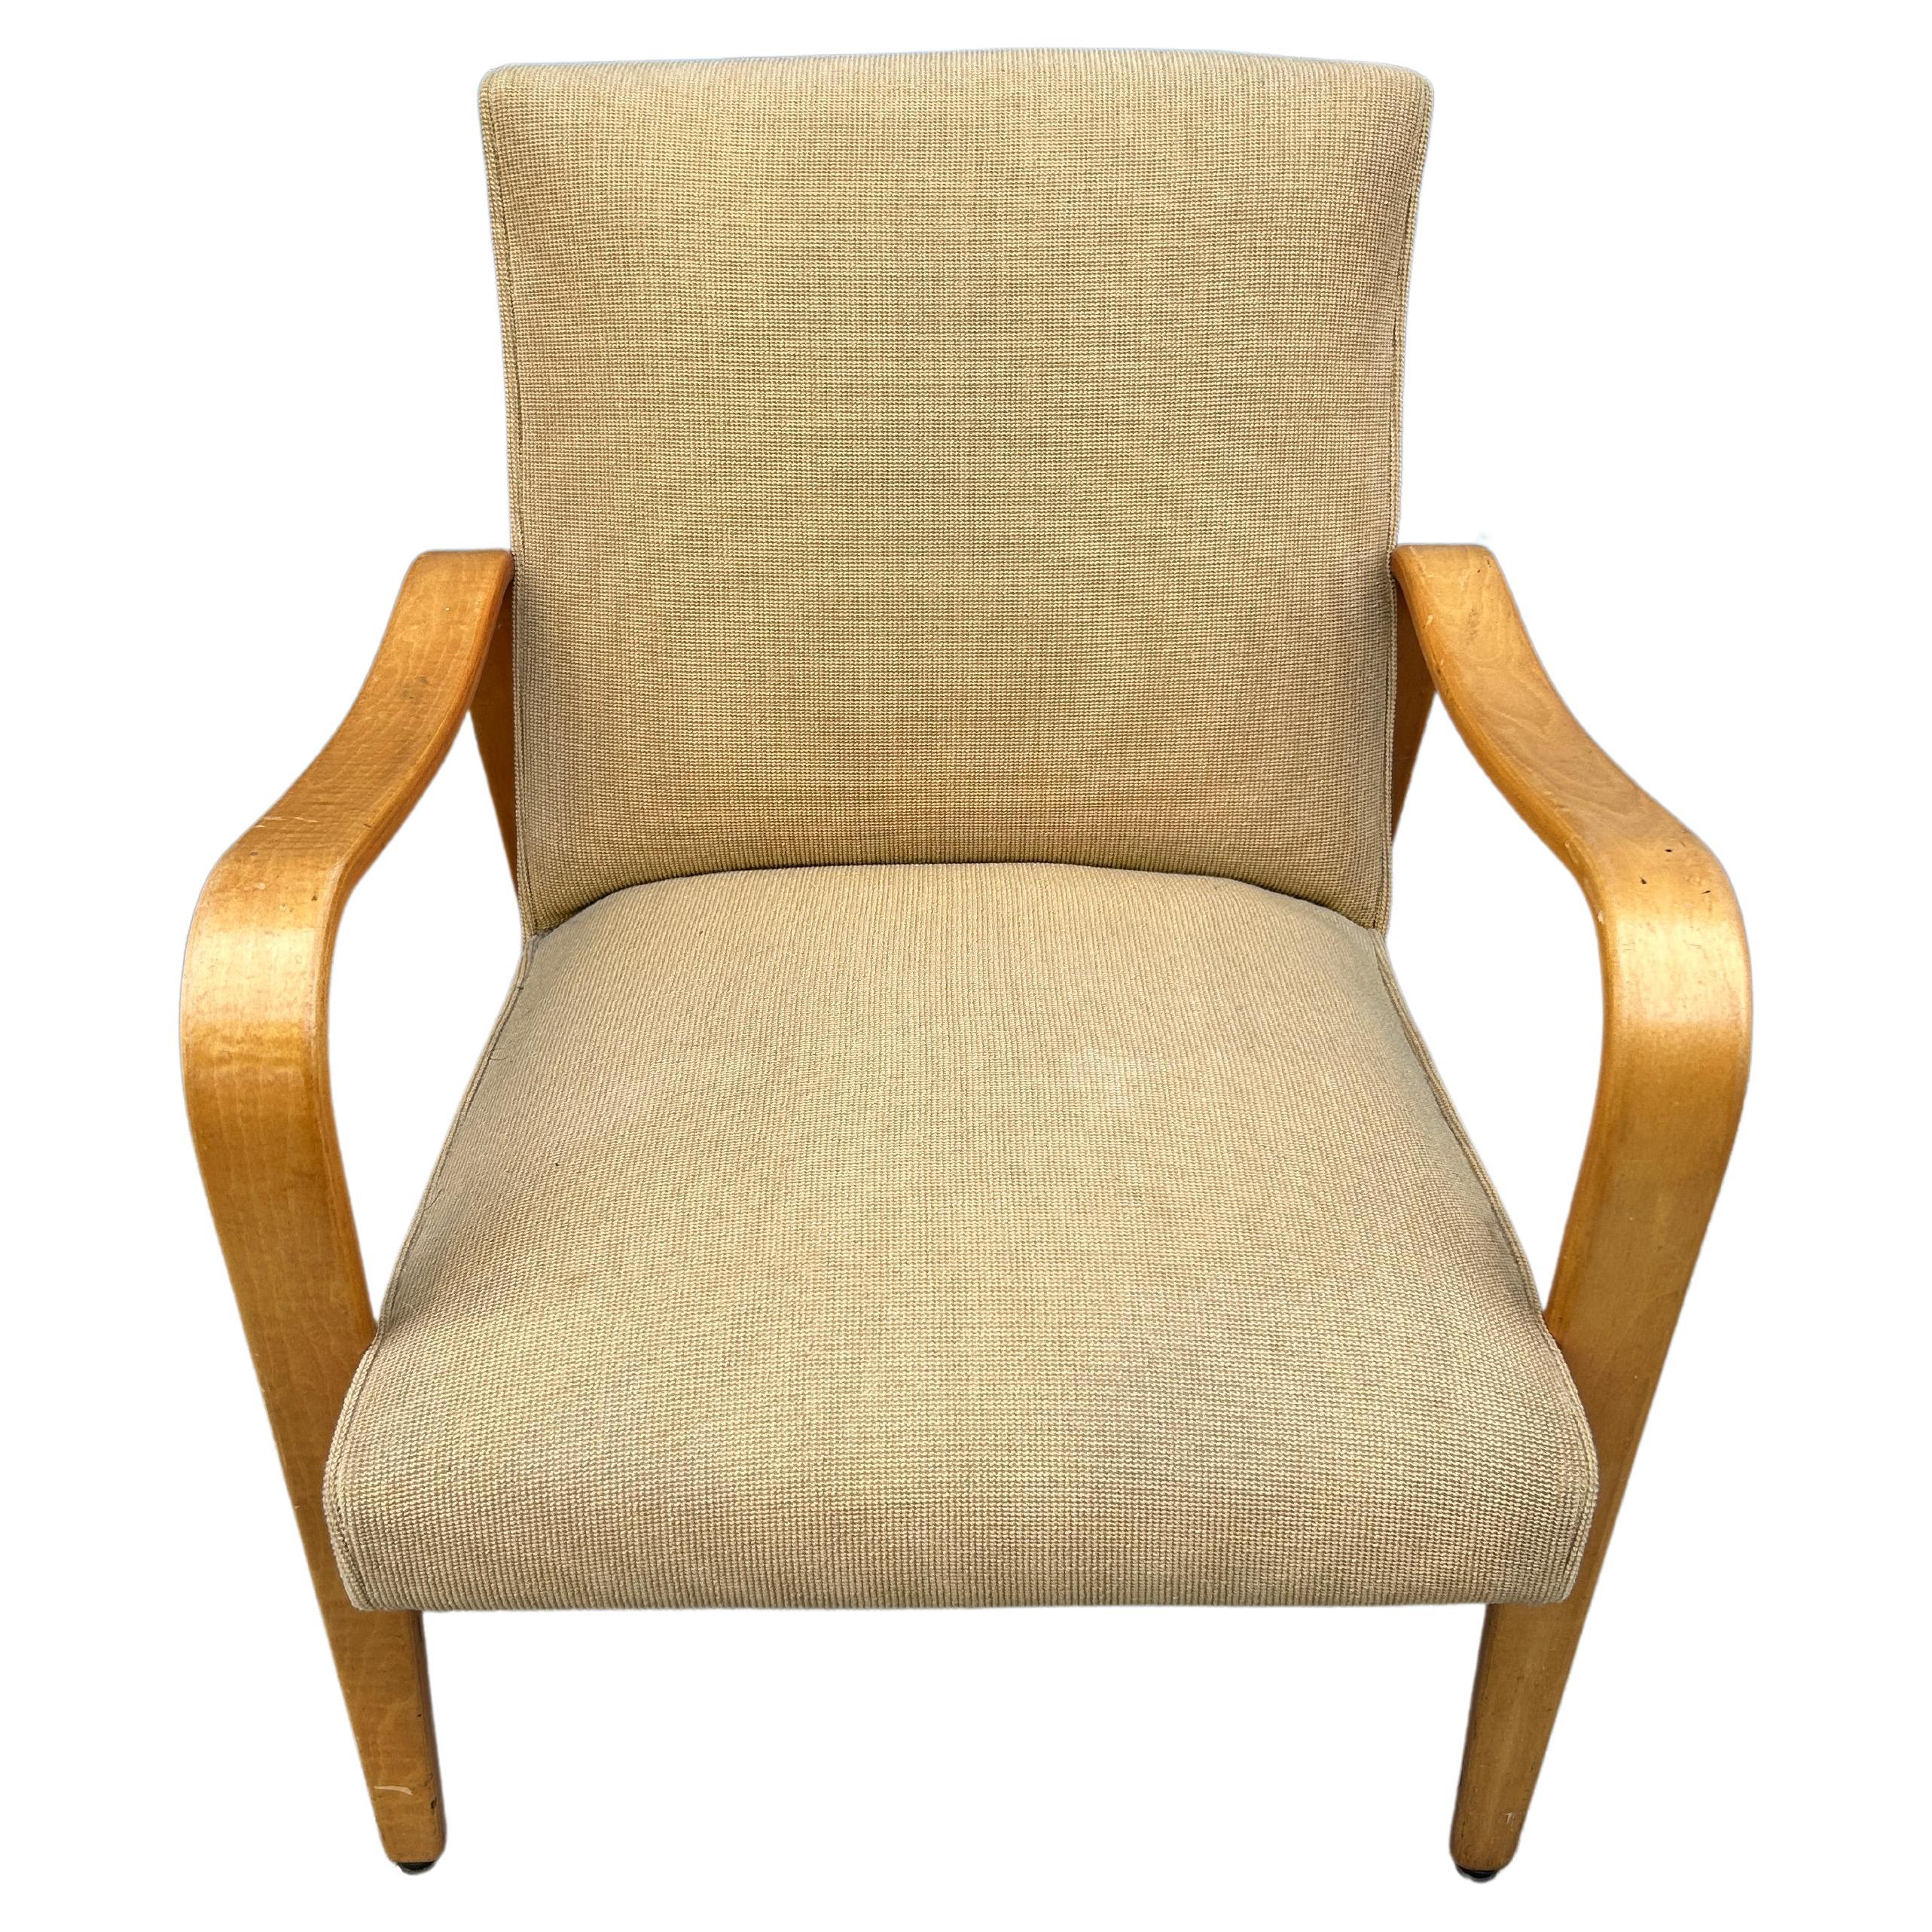 (1) Mid-Century Modern Thonet bentwood birch lounge armchair. Has original tan upholstery. Great vintage condition. Timeless chair design by Thonet. Curved birch bentwood arms. Located in Brooklyn NYC.

24